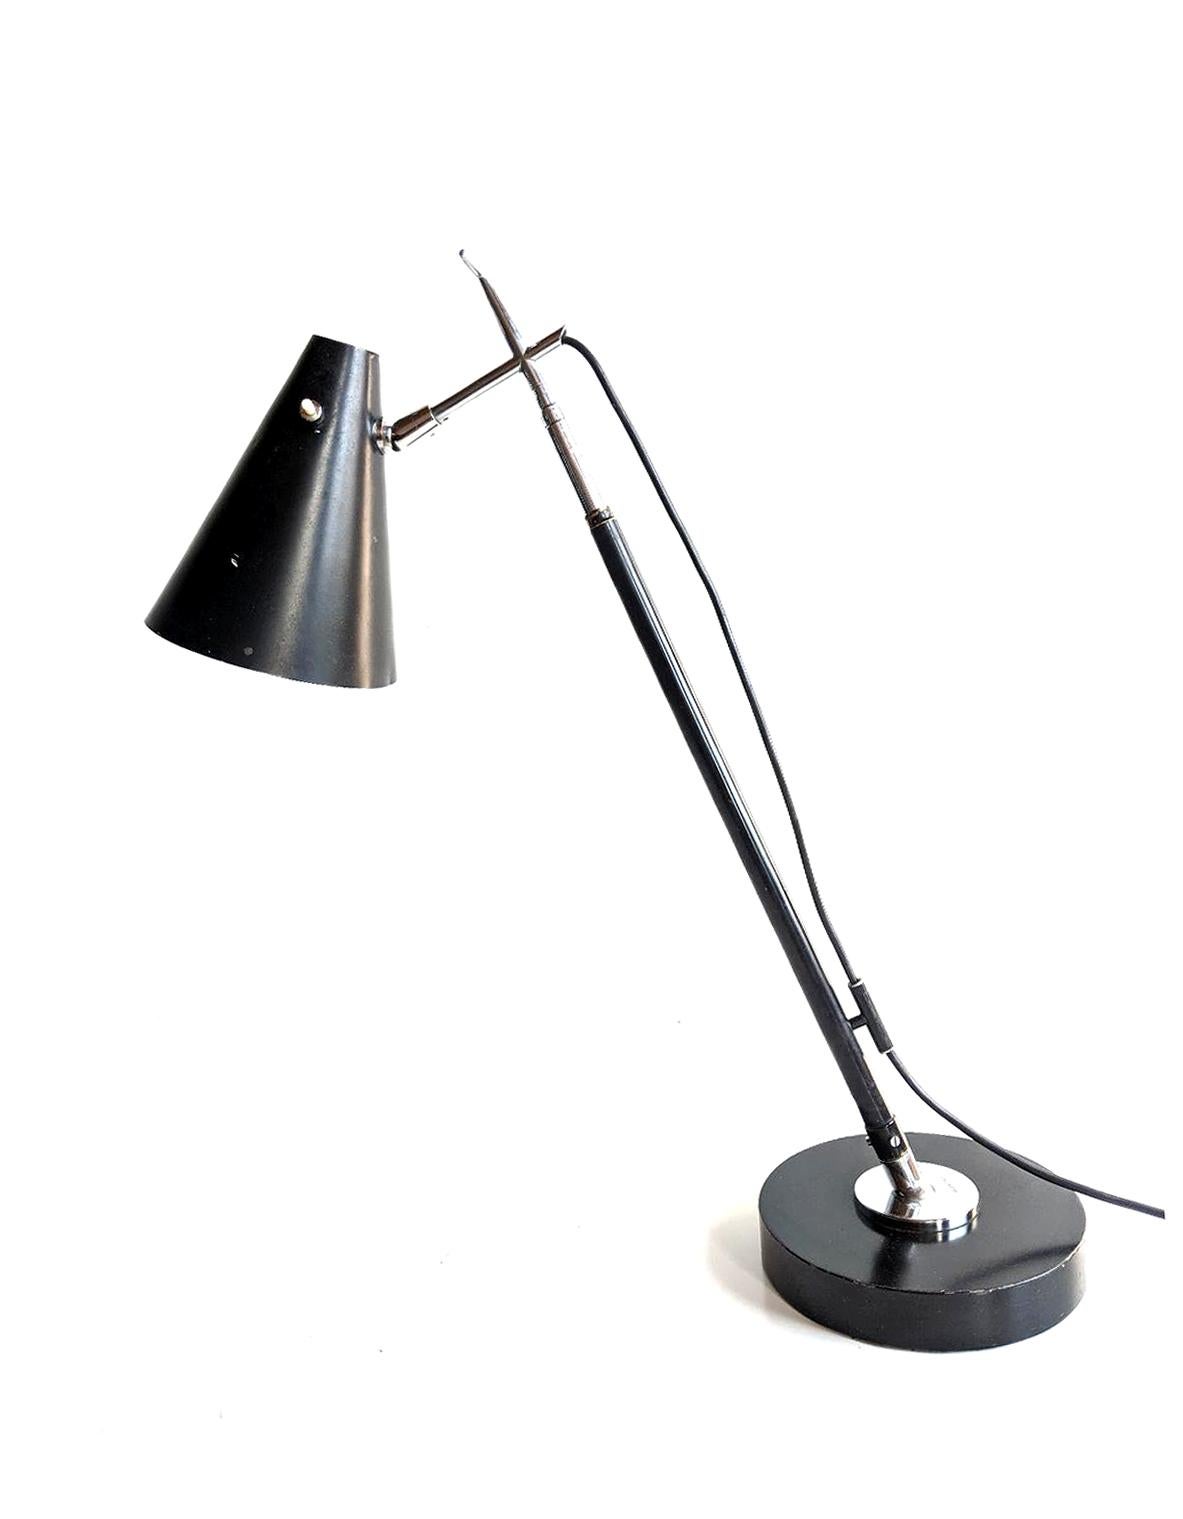 Lamp designed by Giuseppe Ostuni, circa 1955, and produced by O-Luce of Milan, Italy. Lamp converts from a table lamp to a floor lamp due to the telescoping body. There is also a ball joint fitting at the base of the body, so that you can also